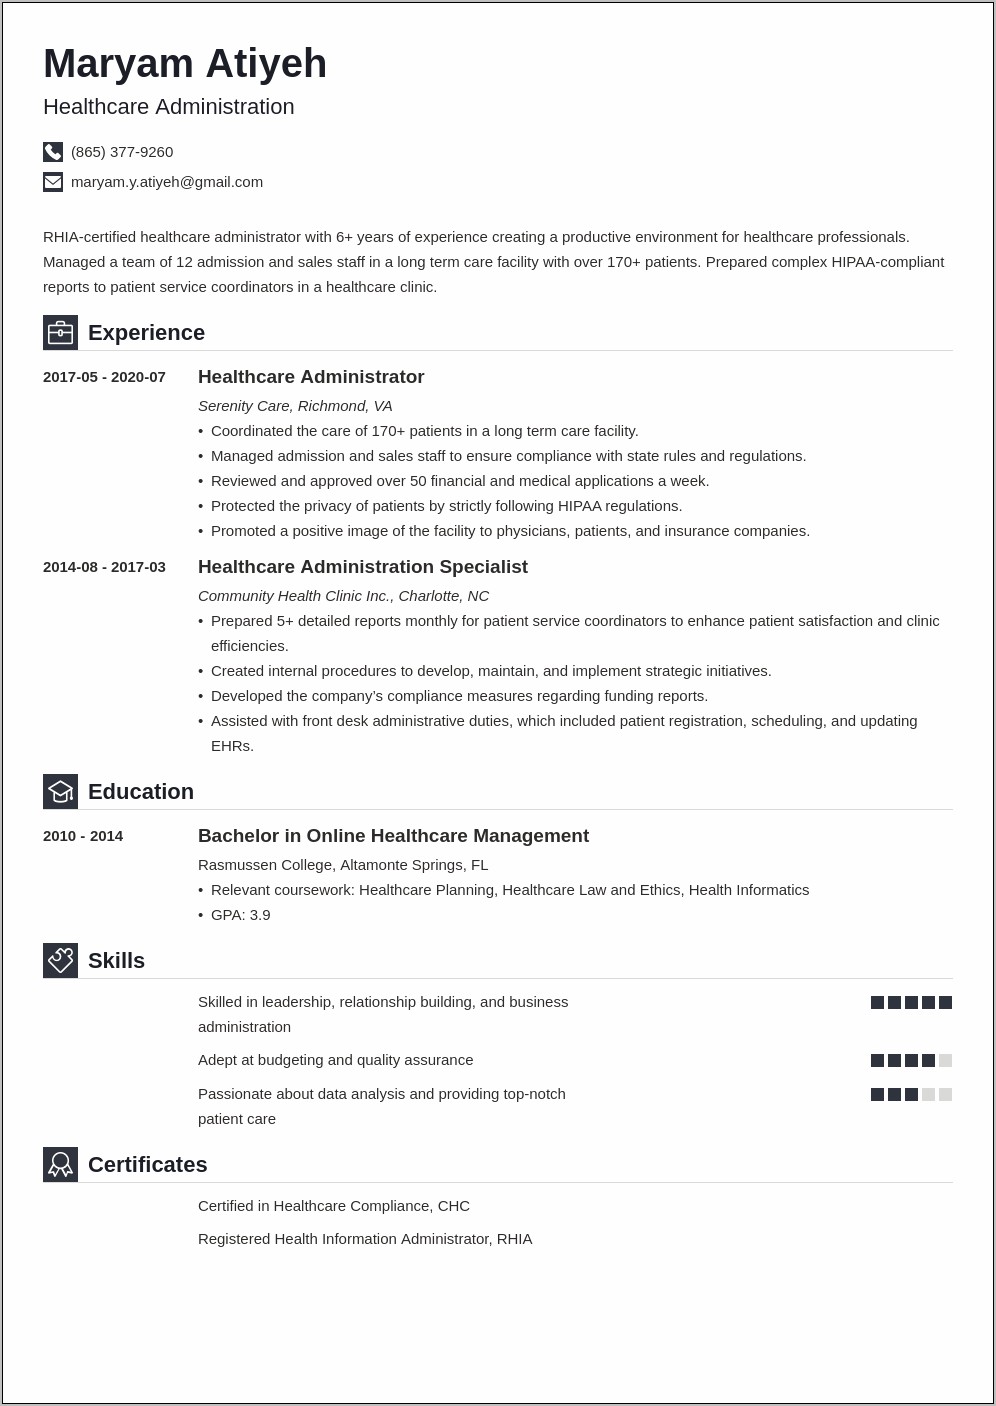 Resume Objective Examples For Ambulatory Surgery Centers